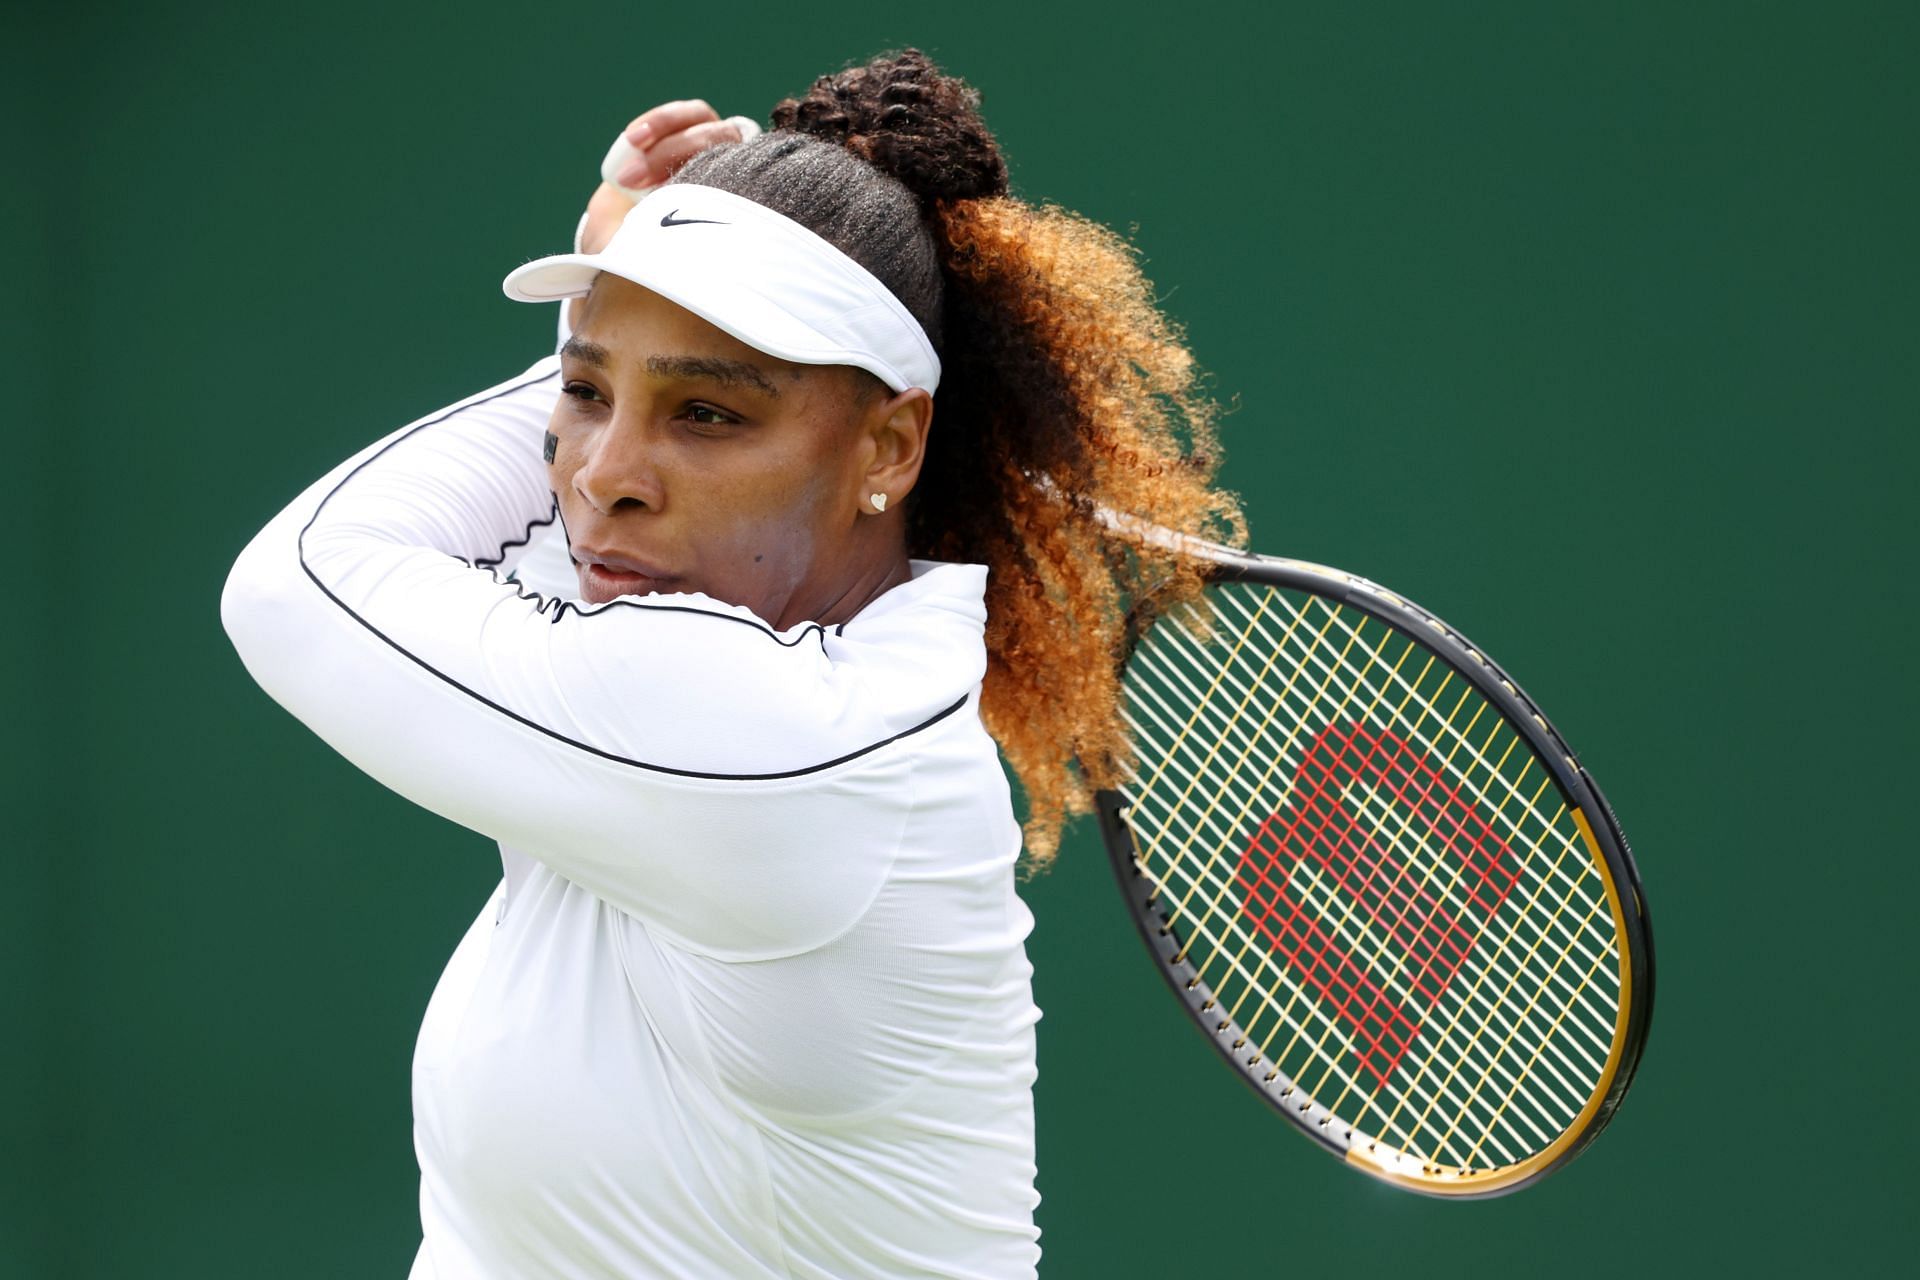 Serena Williams plays a backhand during a training session ahead of the 2022 Wimbledon Championships